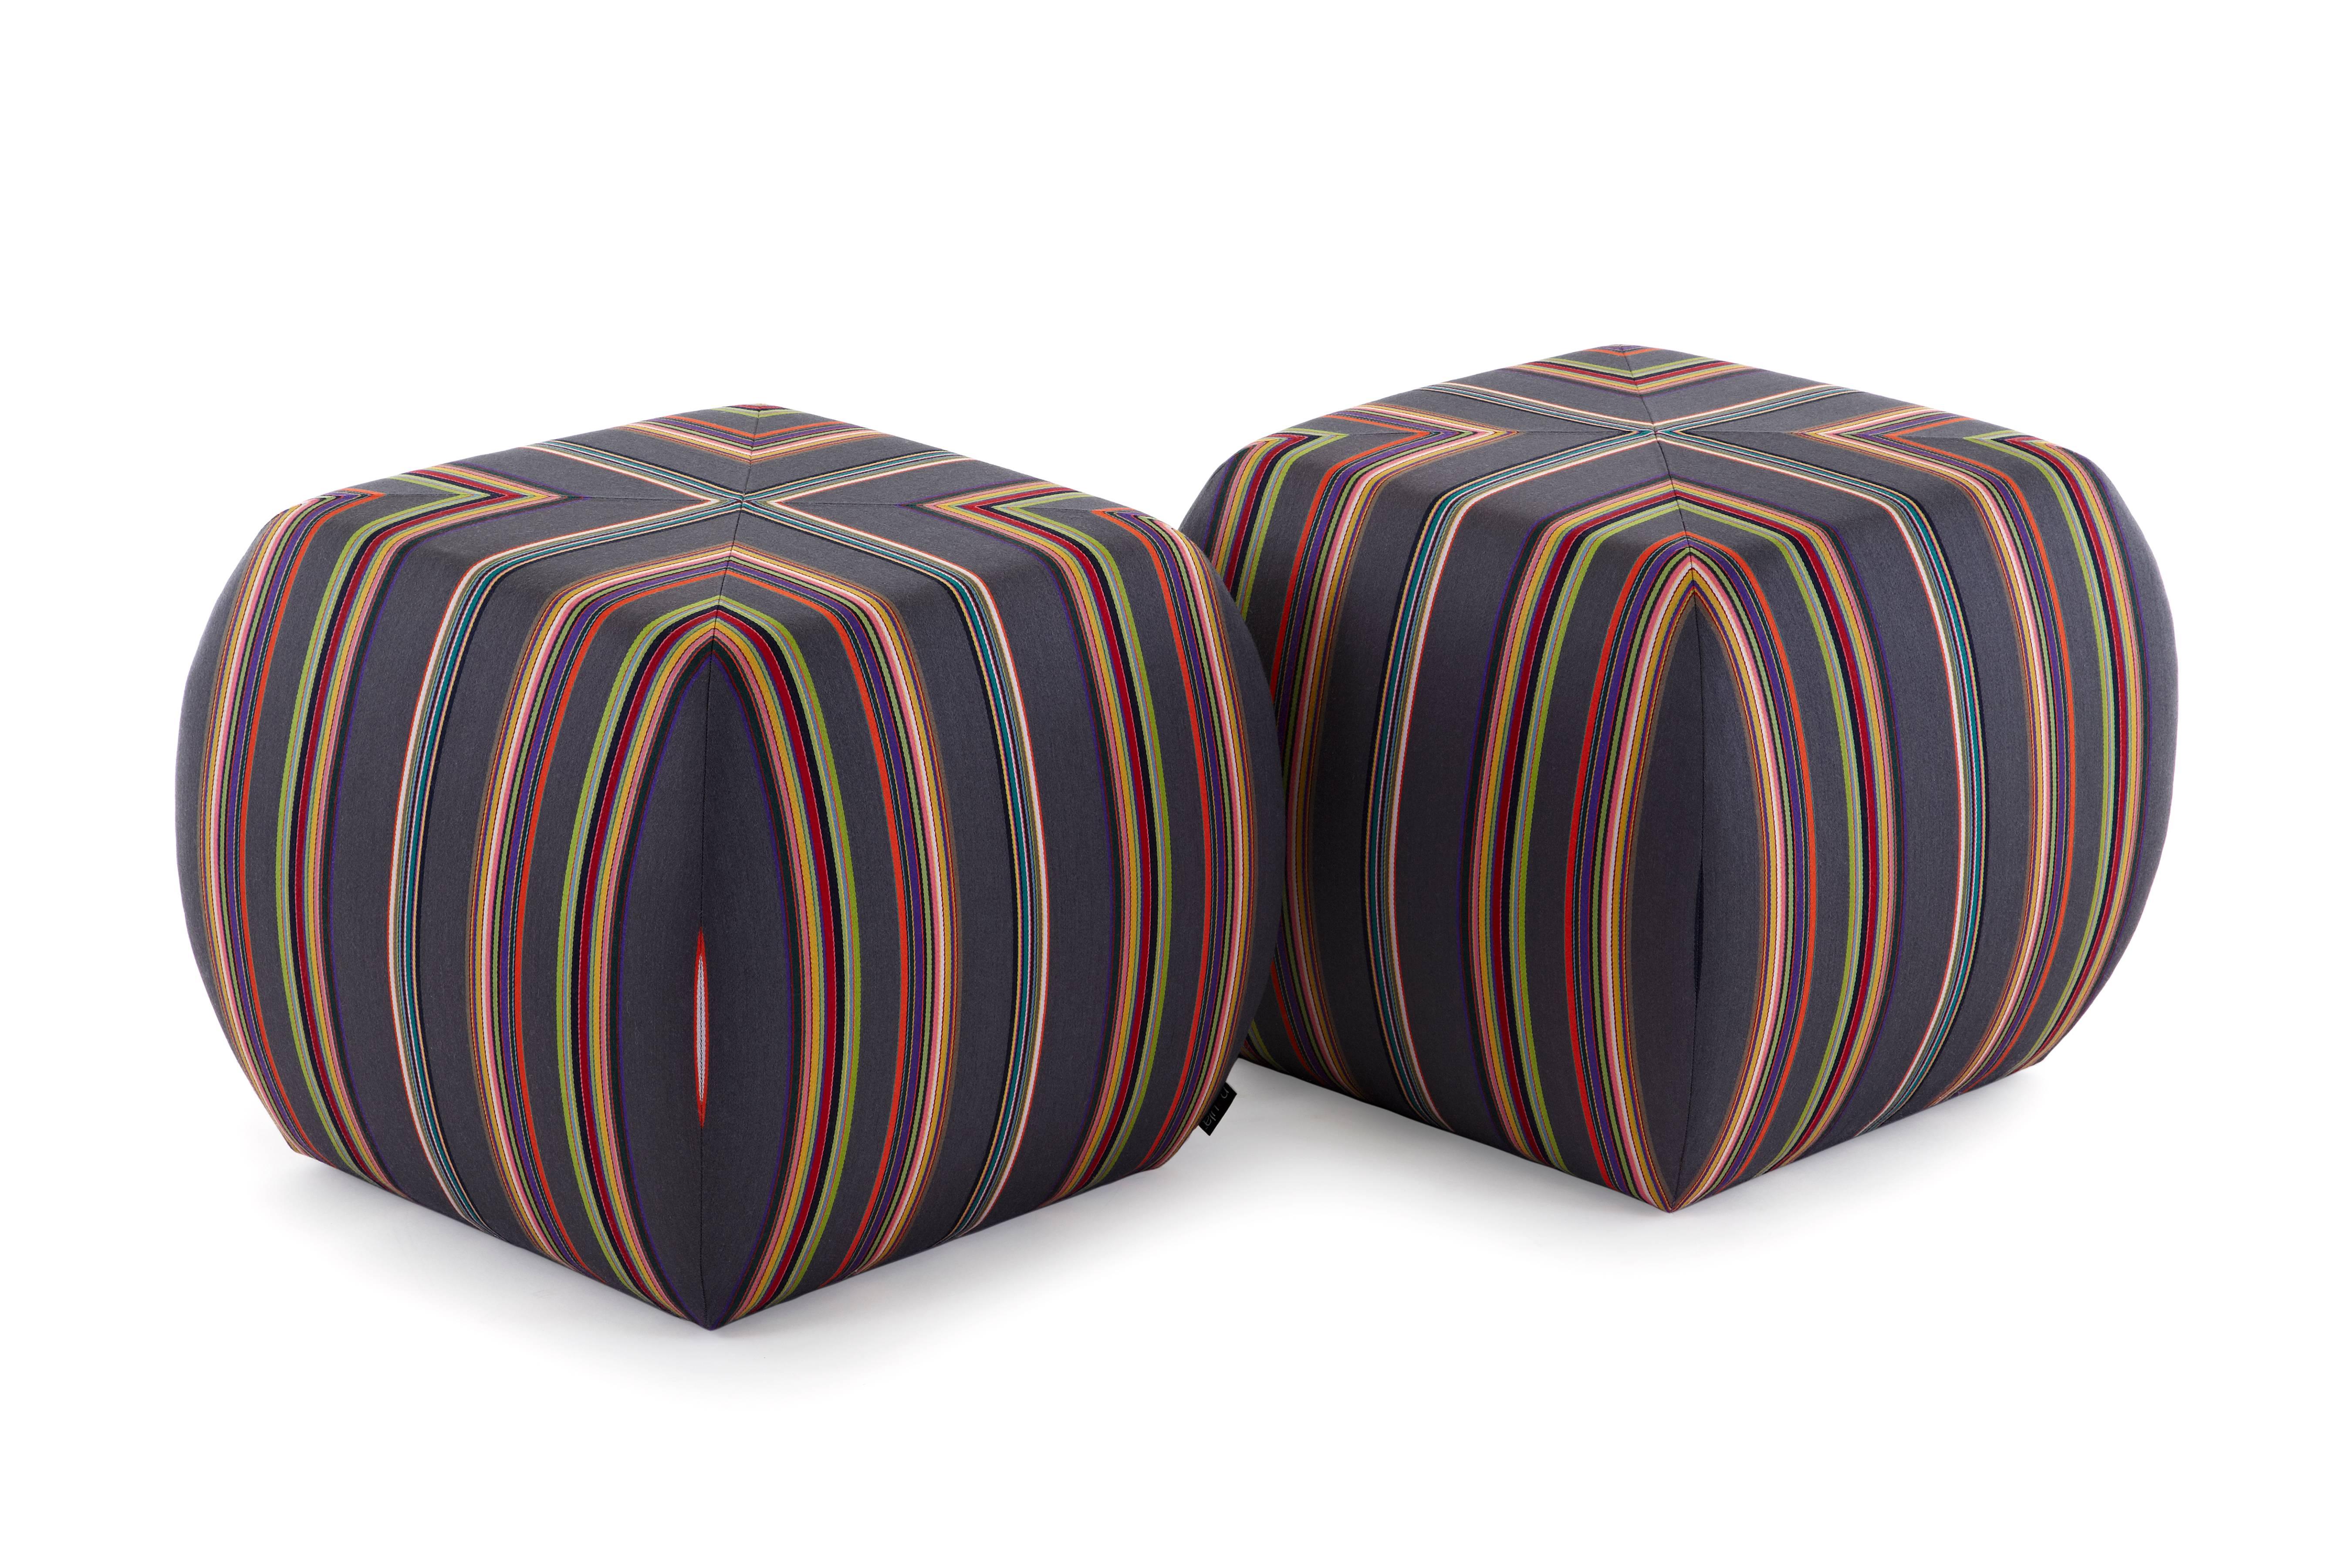 The smart and simple glide striped ottoman can be used as a seat at a table, a place to kick your feet up, or both. Boasting hidden casters, the delicate curves of its sides subtly remove the boxiness of a traditional ottoman to energize any room.

